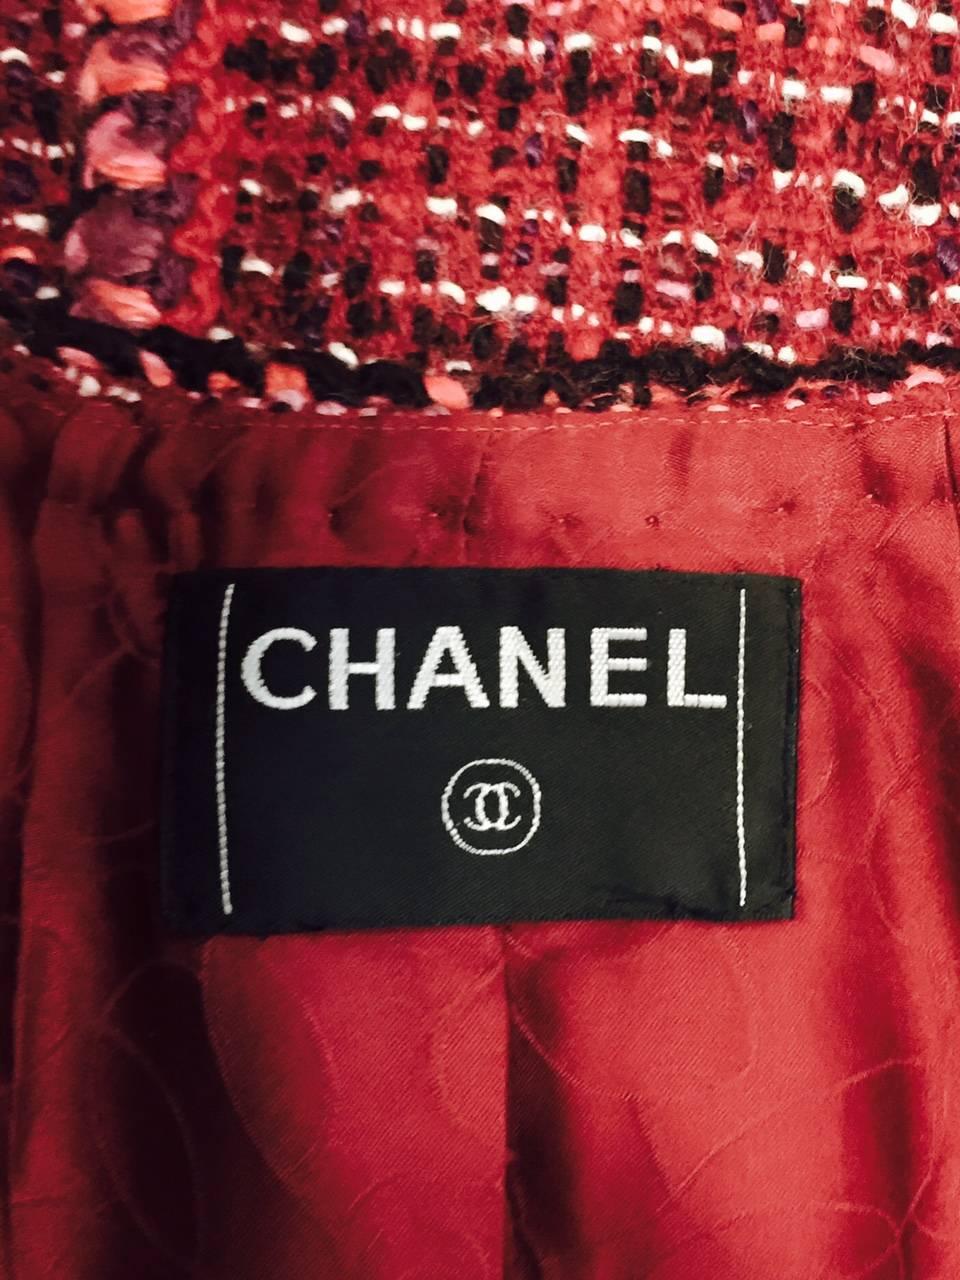 Chanel Fall Cranberry Tweed Jacket  In Excellent Condition For Sale In Palm Beach, FL